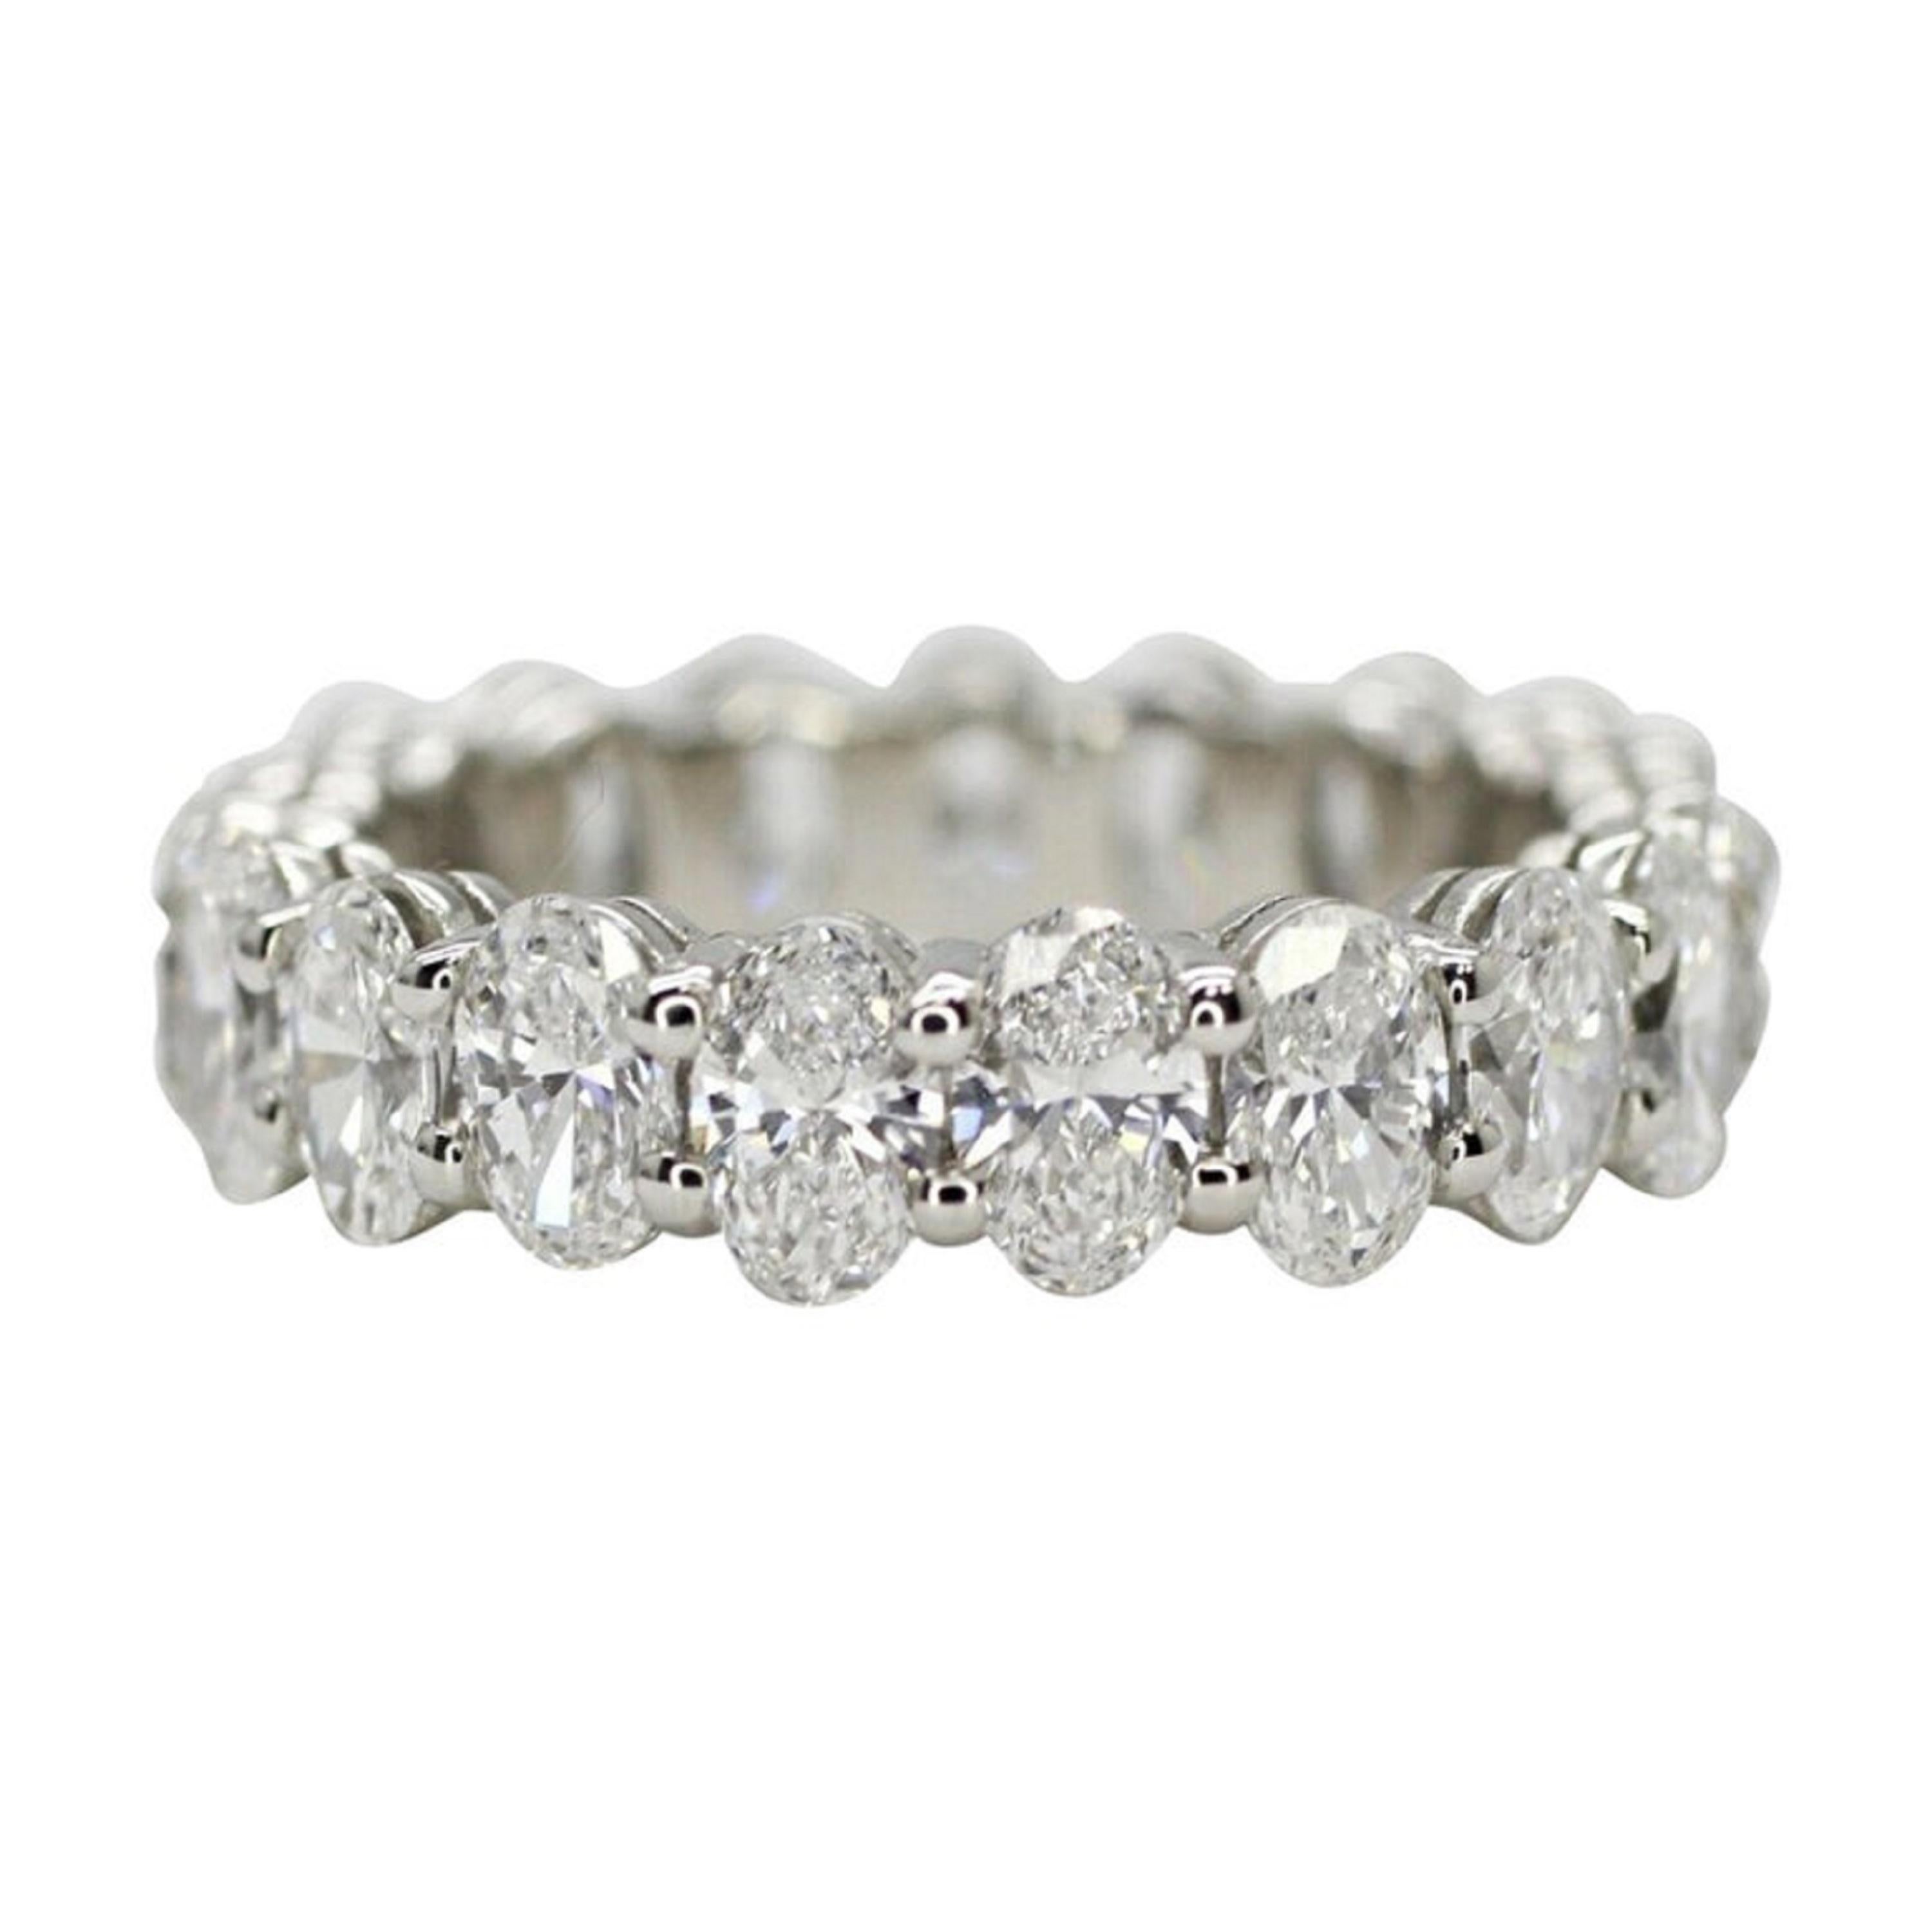 This beautiful Layout of oval cut diamonds for an eternity ring is just waiting for you to decide on your ring.  Featuring 21 oval cut diamonds set in 14k white gold weighing 3.07carats. These spectacular diamonds are G in color, VS1-2  clarity.